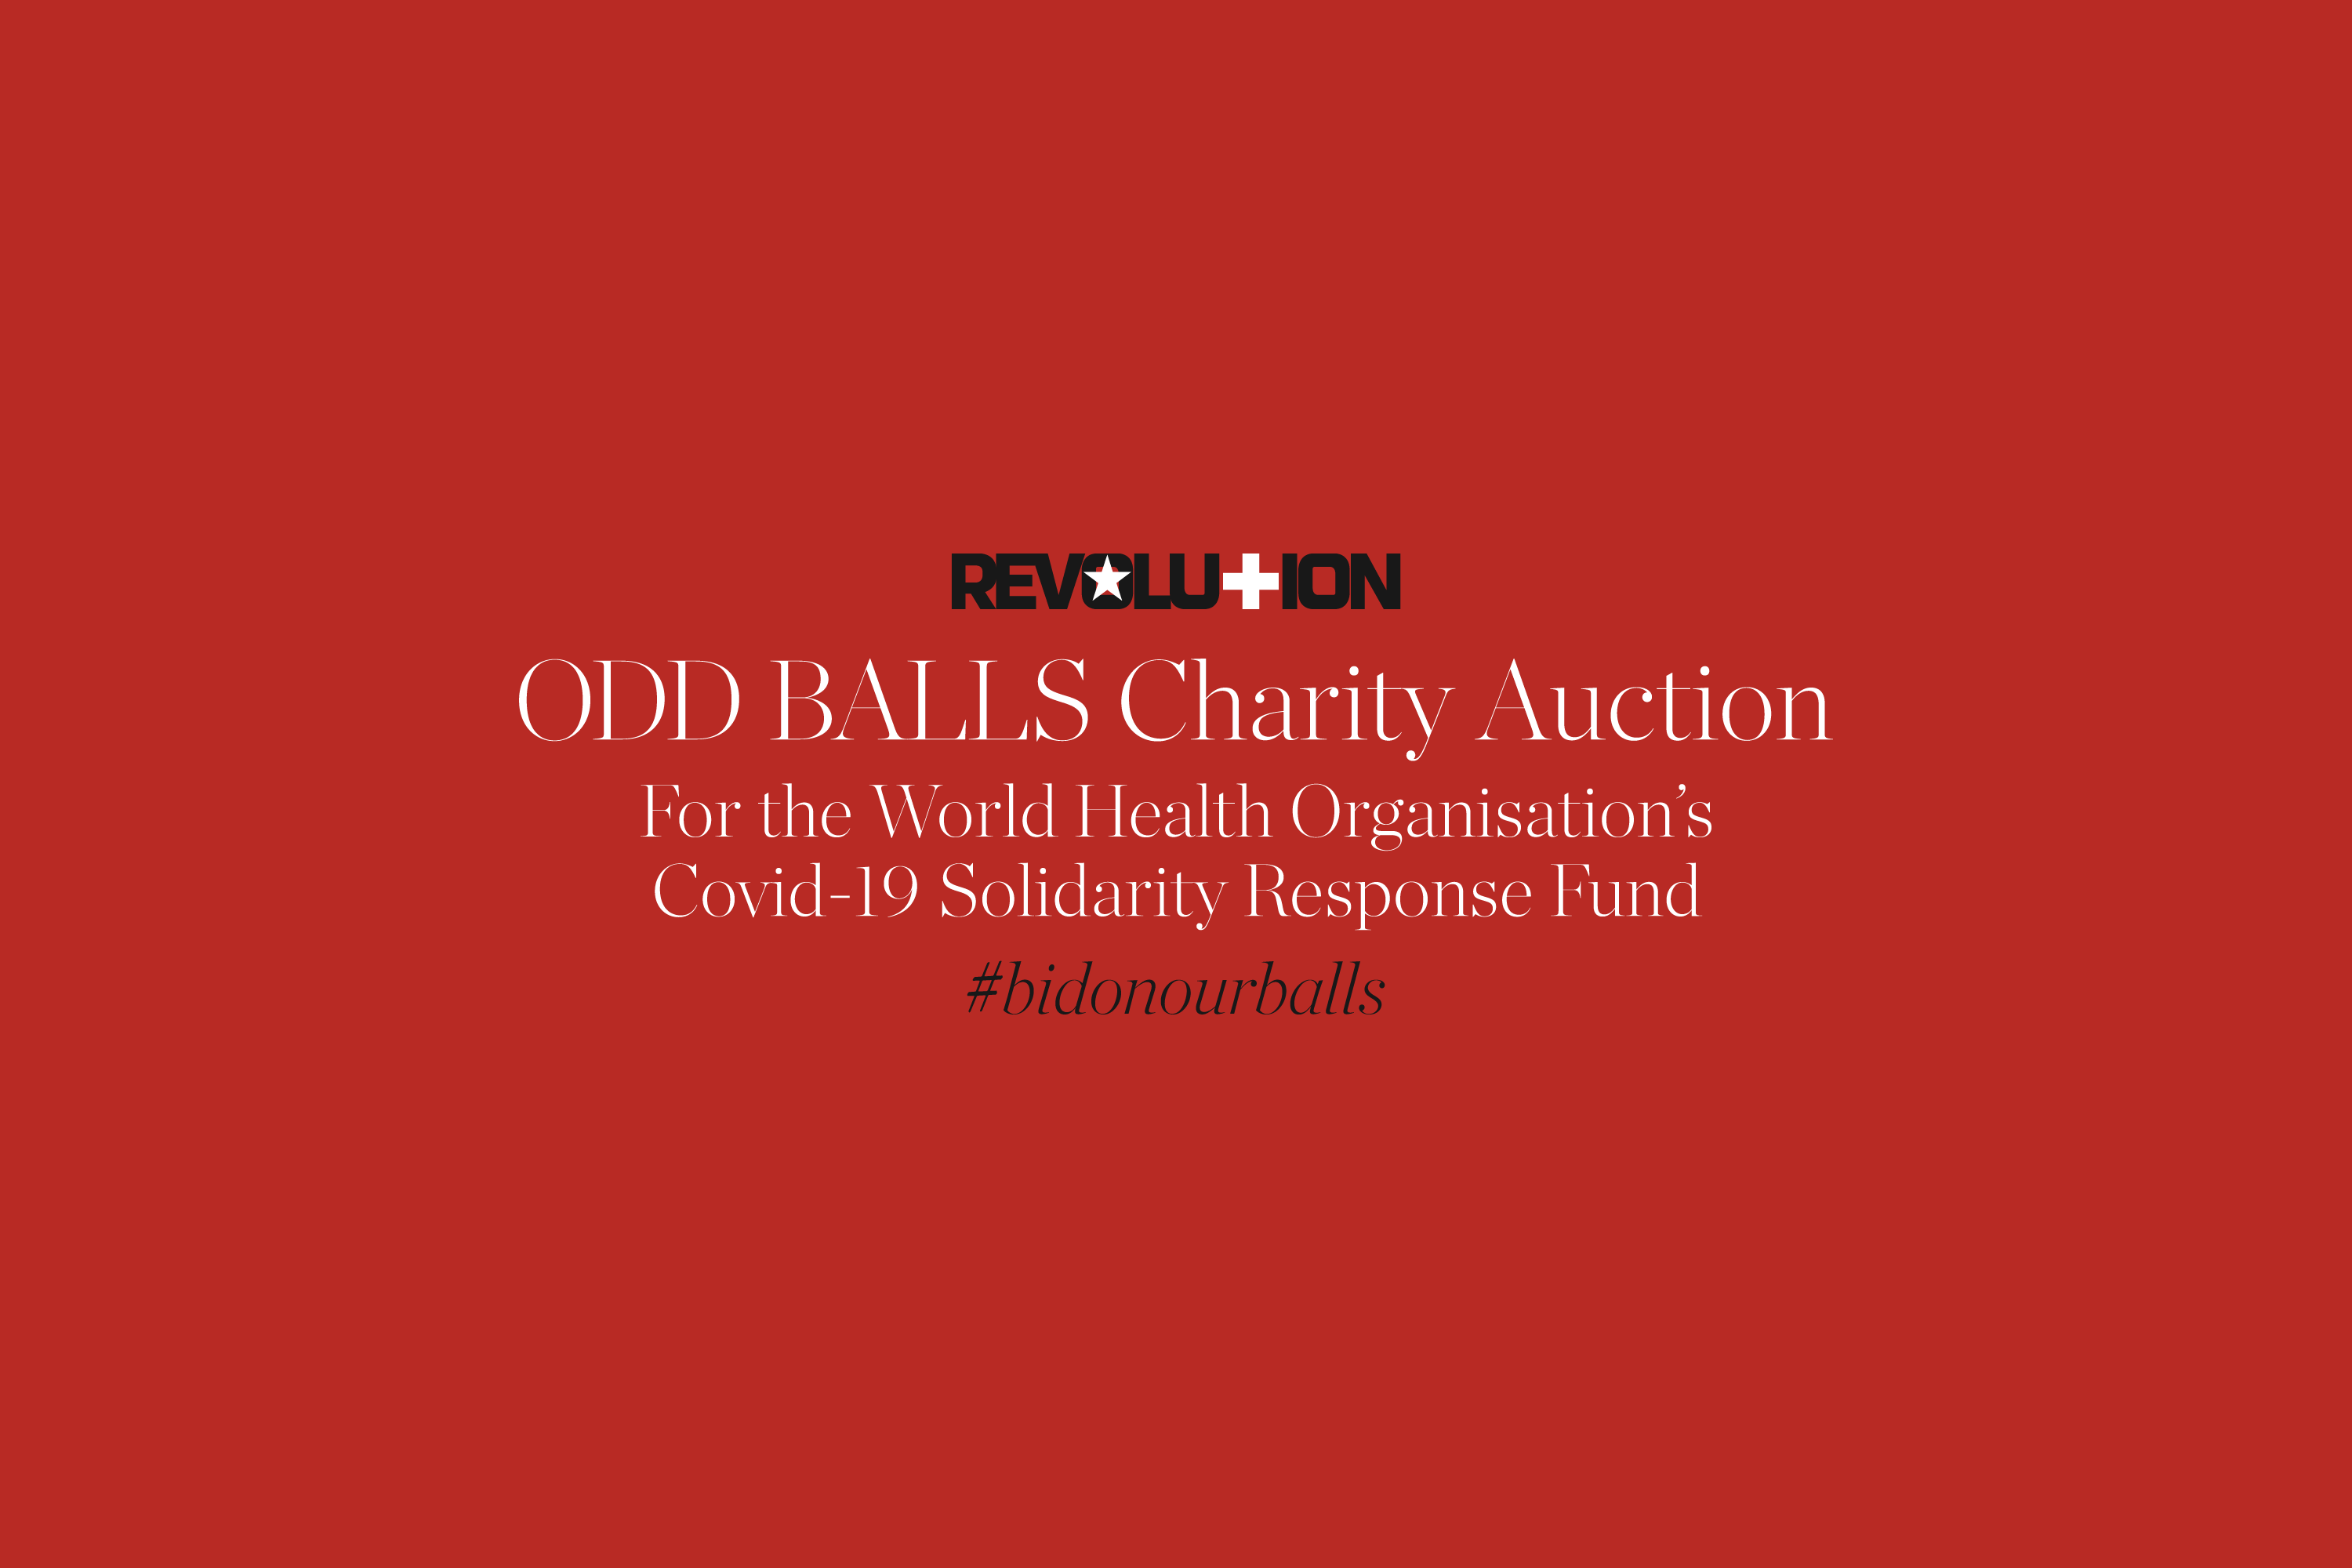 Revolution ODD BALLS Charity Auction for WHO's Covid-19 Solidarity Response Fund (Image © Revolution)